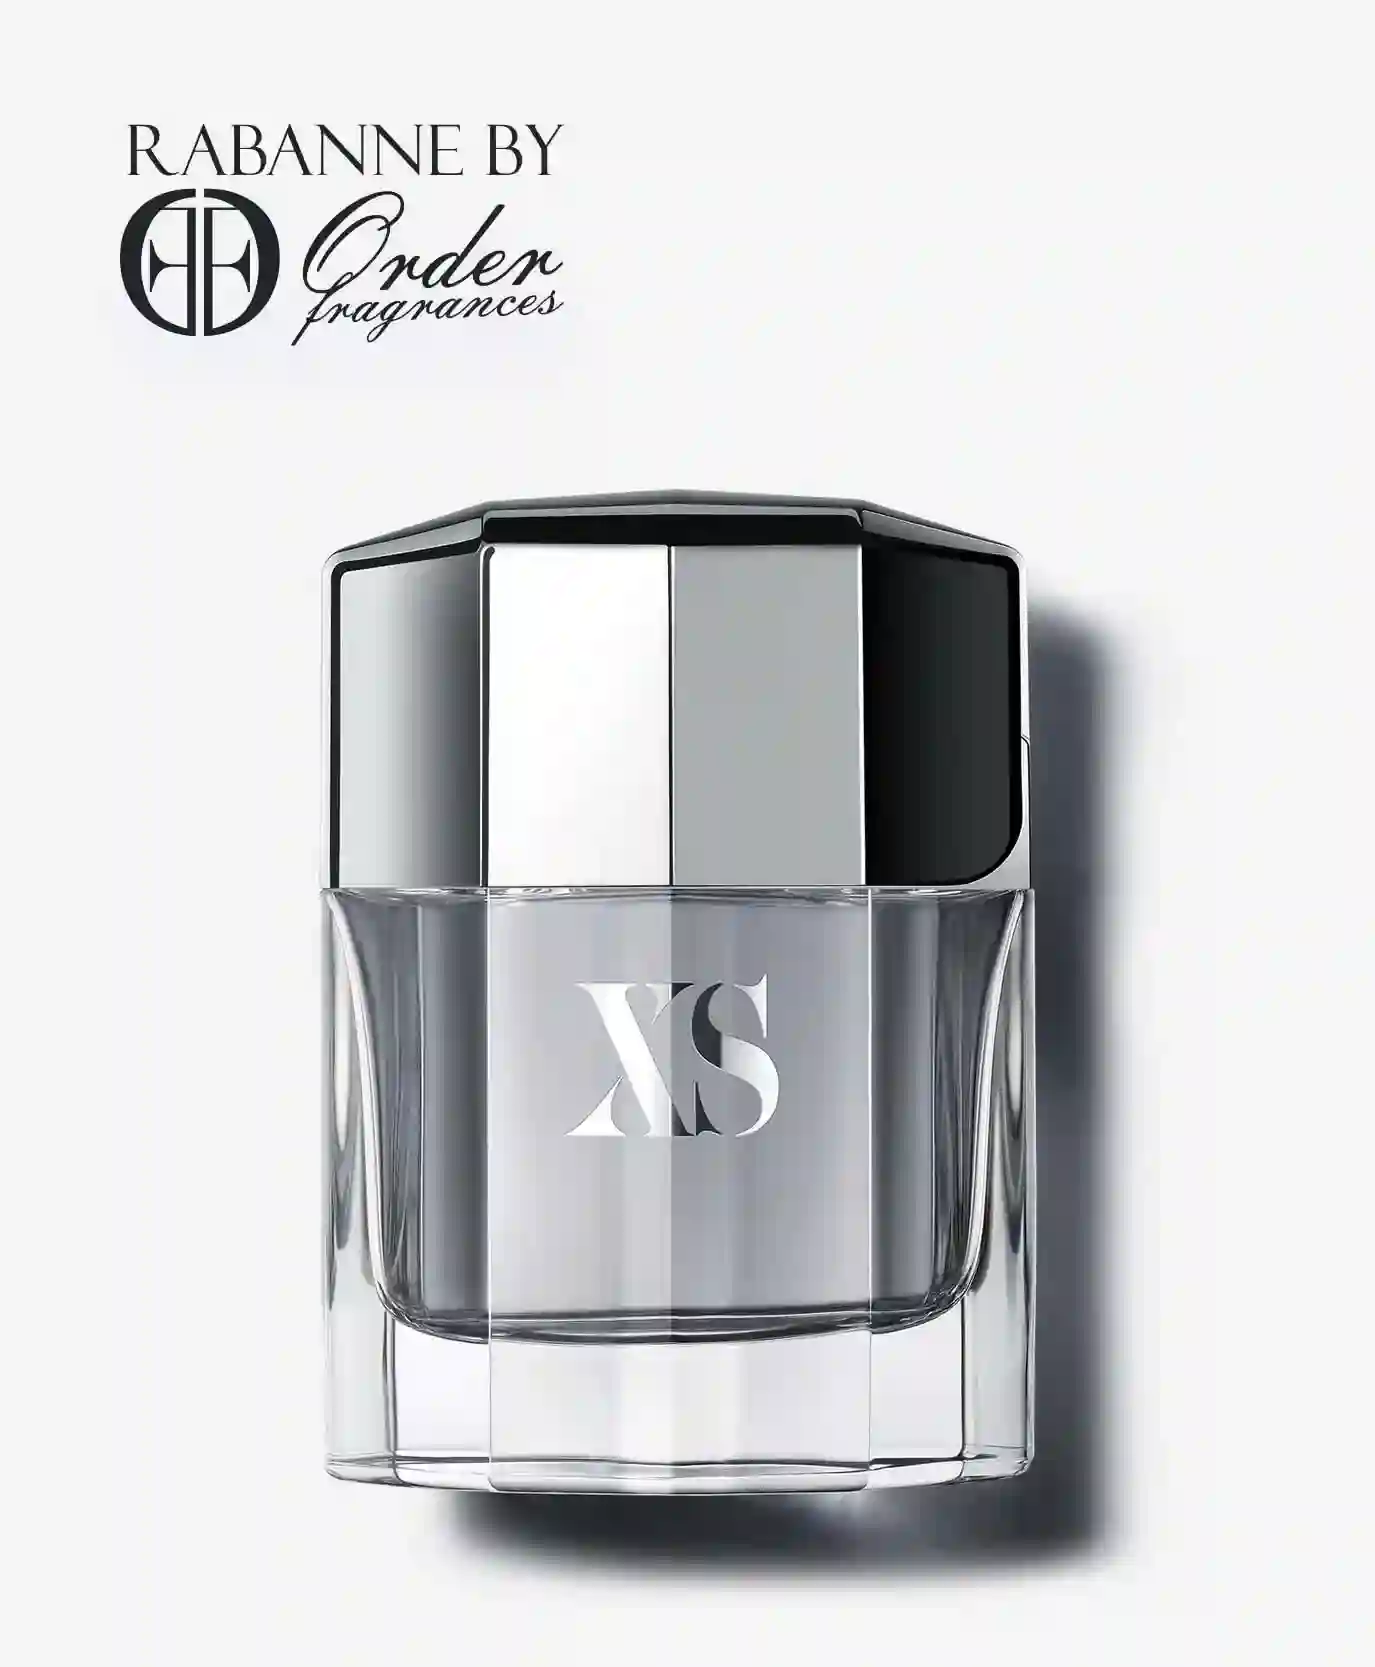 Paco Rabanne Xs Pour homme Edt 50ml